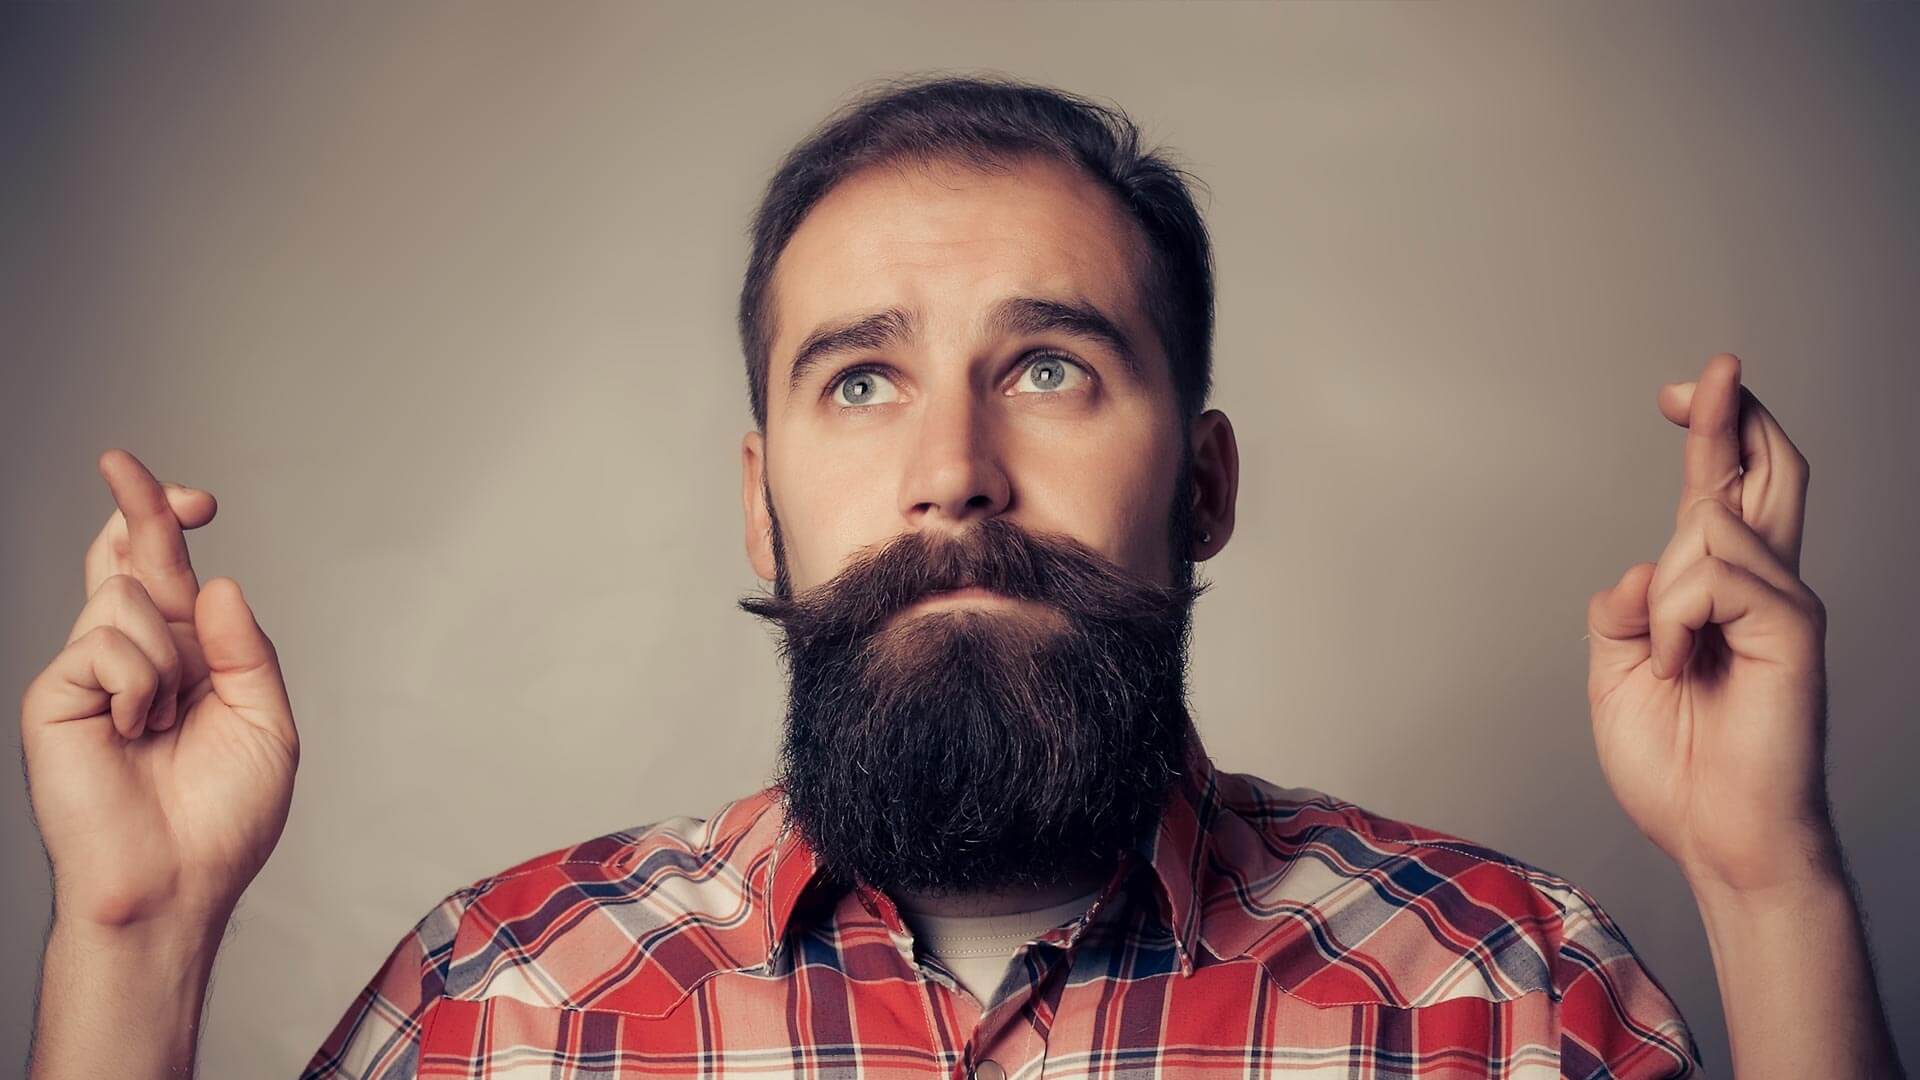 This area profiles some of our members and most Beardiful man icons. It's also a good place to see examples of men with beards and just how good Beardifulman beard care products are for styling & general beard health!